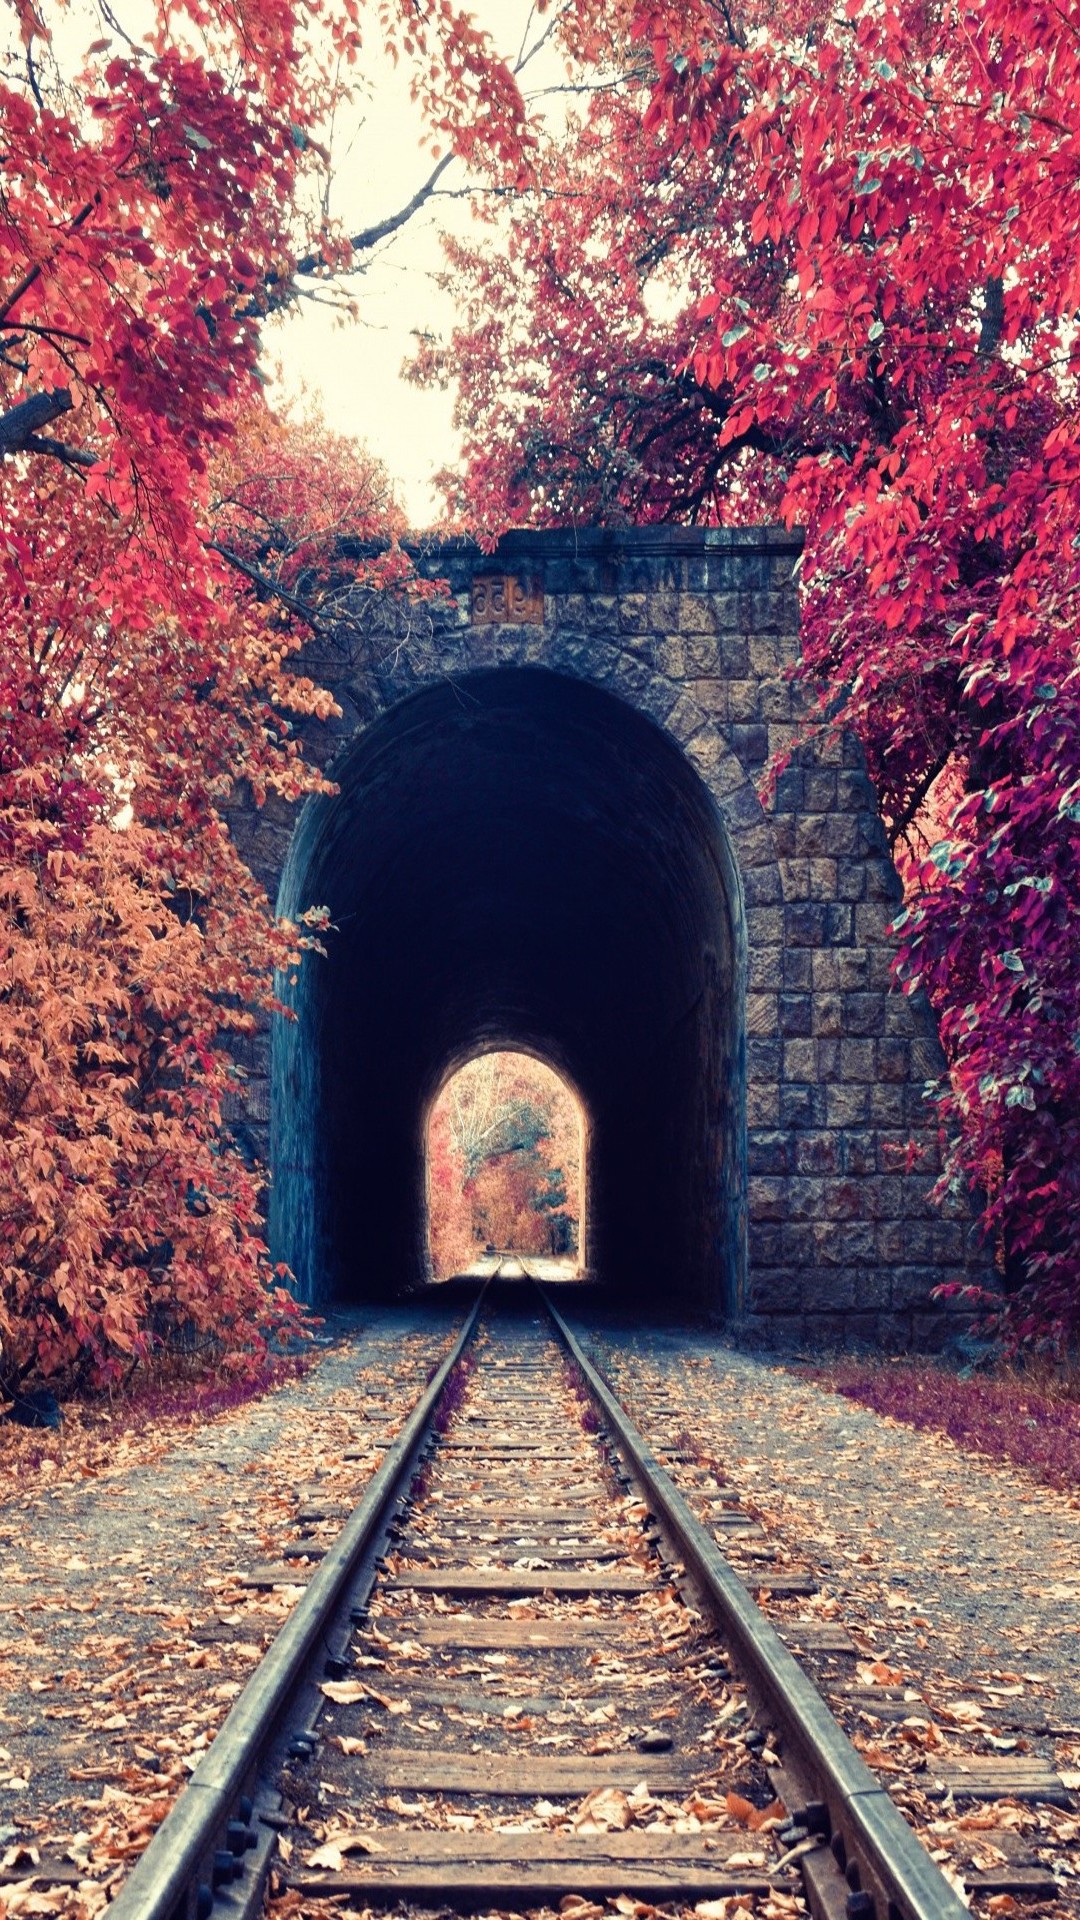 portrait Display, Nature, Trees, Fall, Leaves, Railway, Tunnel, Red,  Bricks, Armenia Wallpapers HD / Desktop and Mobile Backgrounds